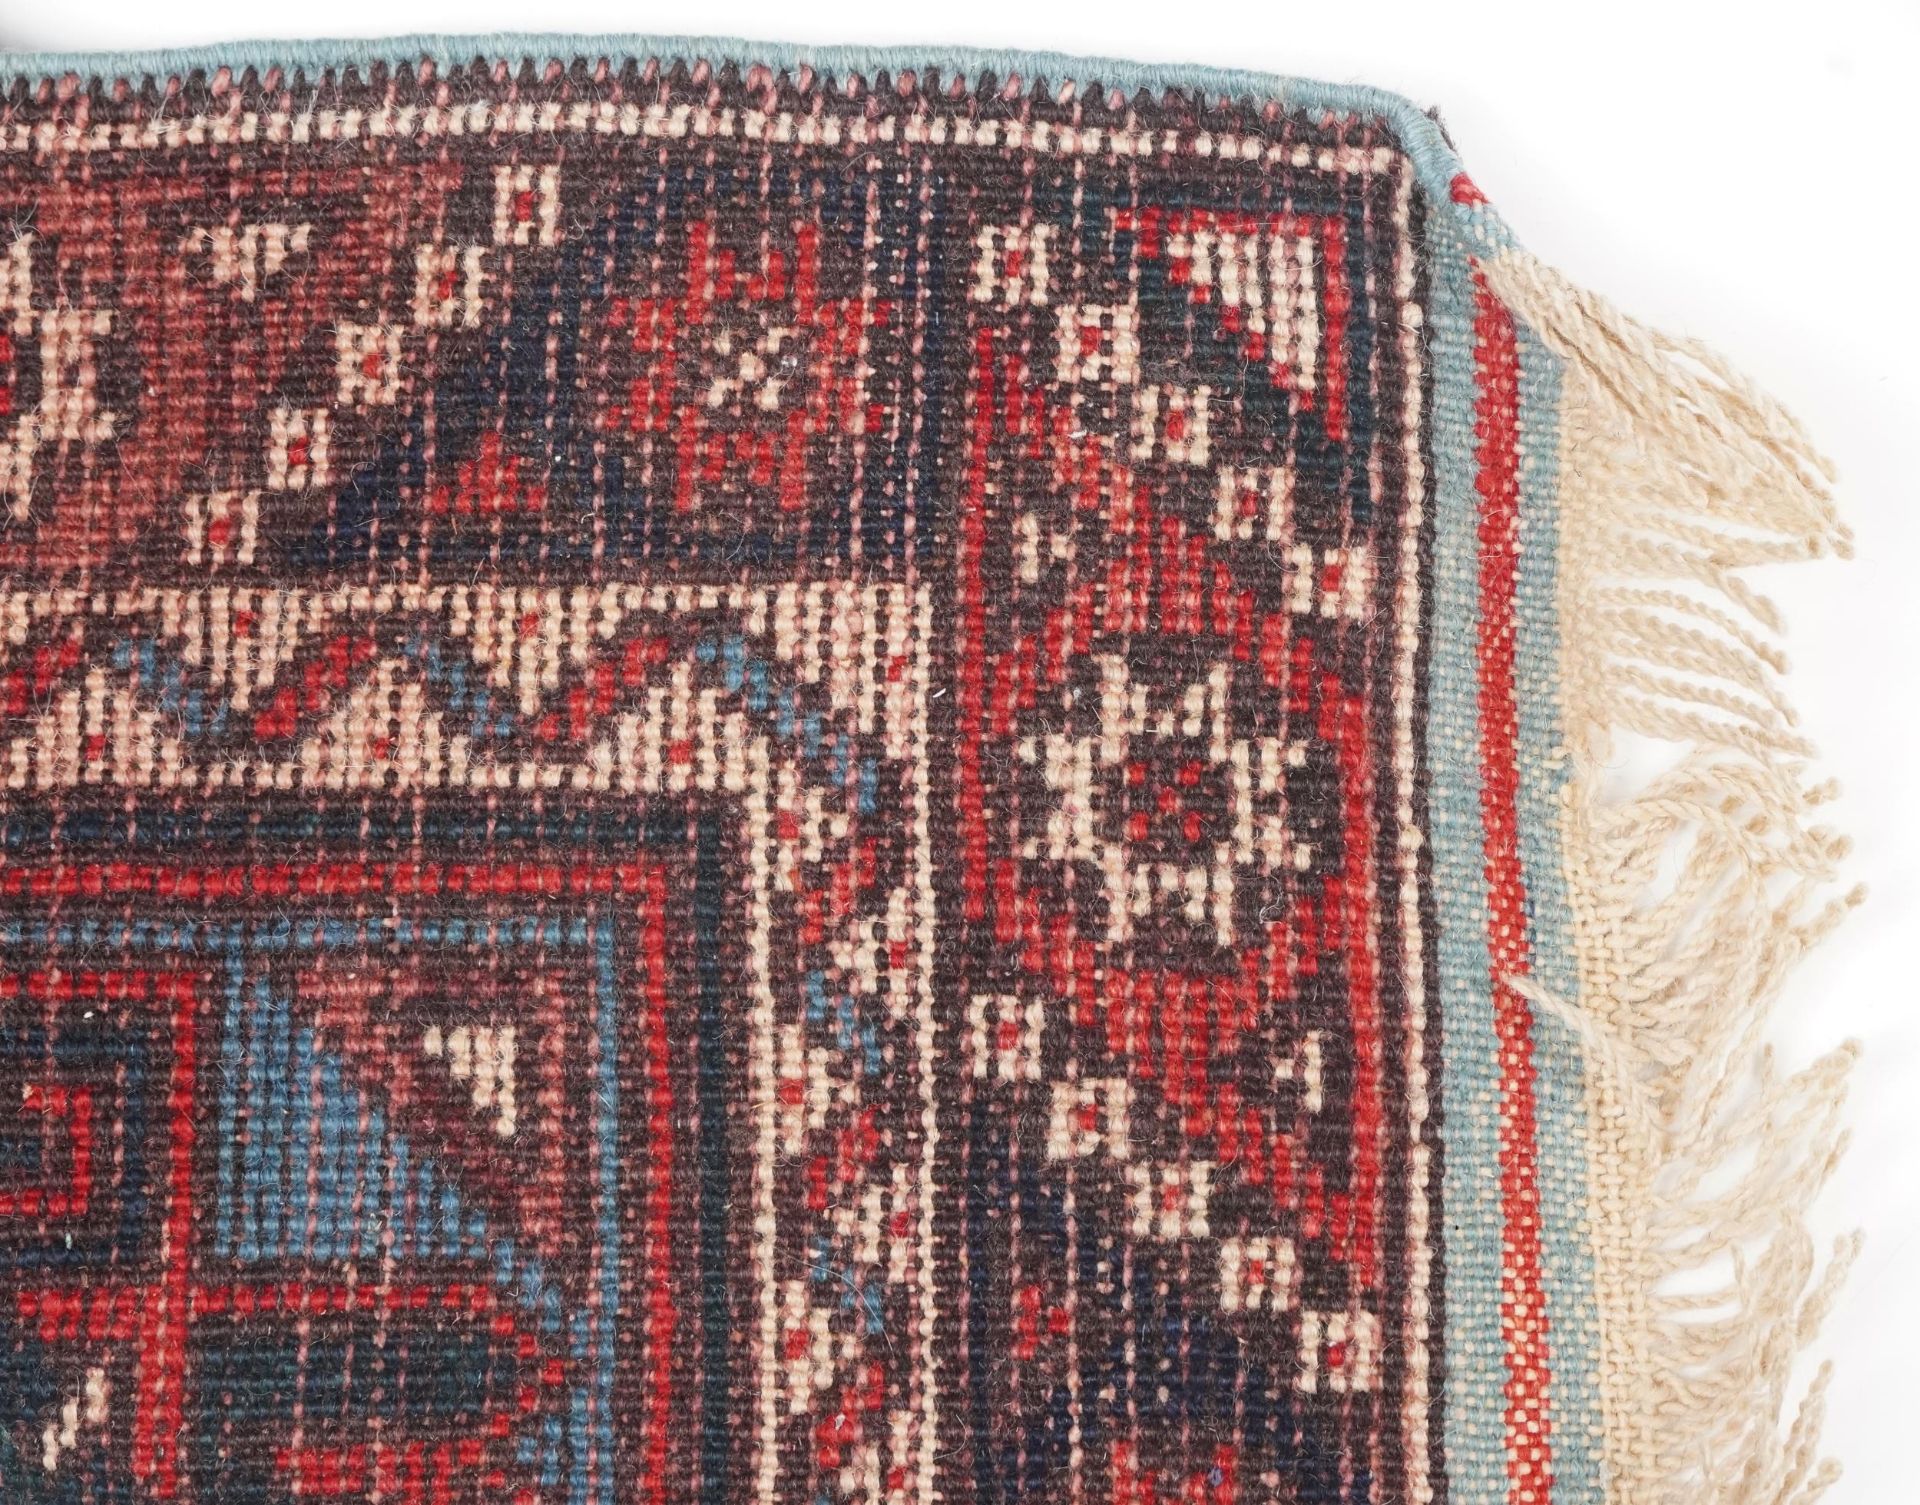 Turkish Red and blue ground carpet runner having an allover repeat geometric design, 295cm x - Image 5 of 5